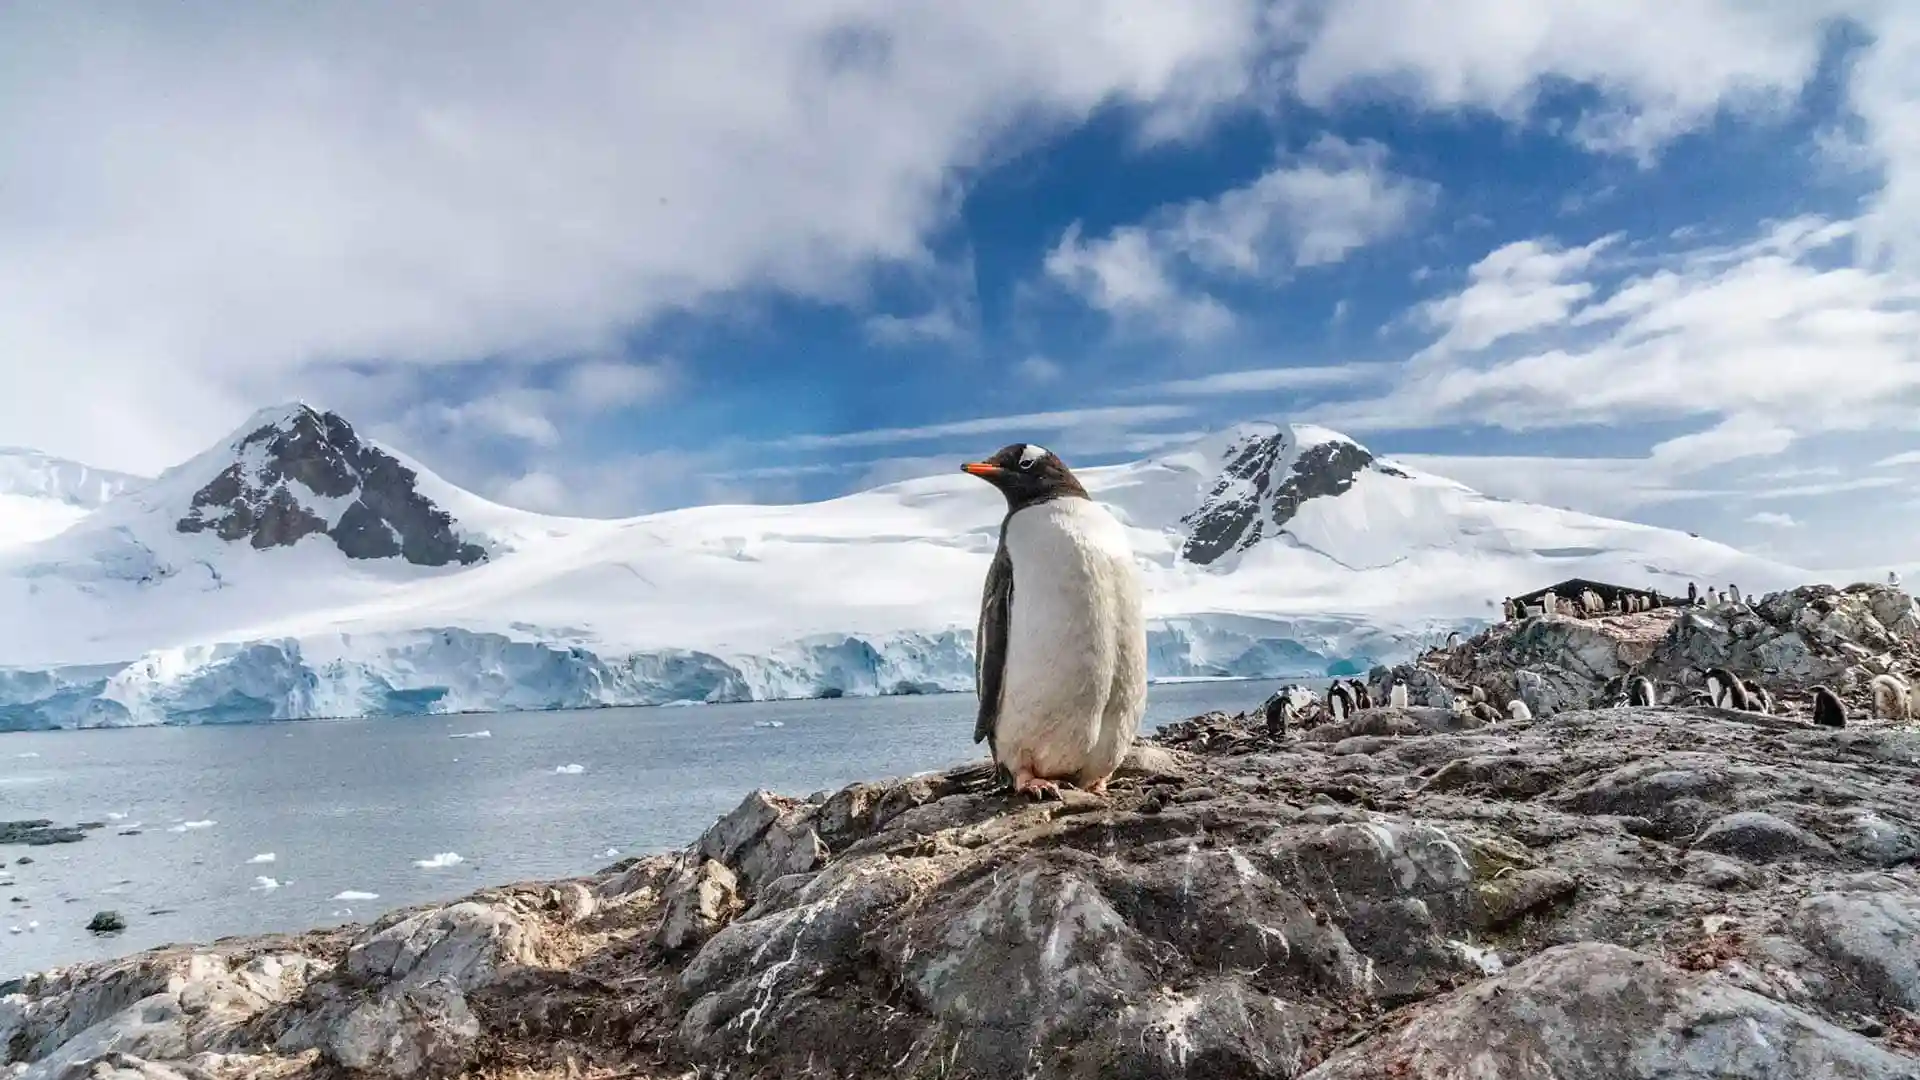 Penguin in Antarctica, standing on rocky land with snow-covered landscape in background.